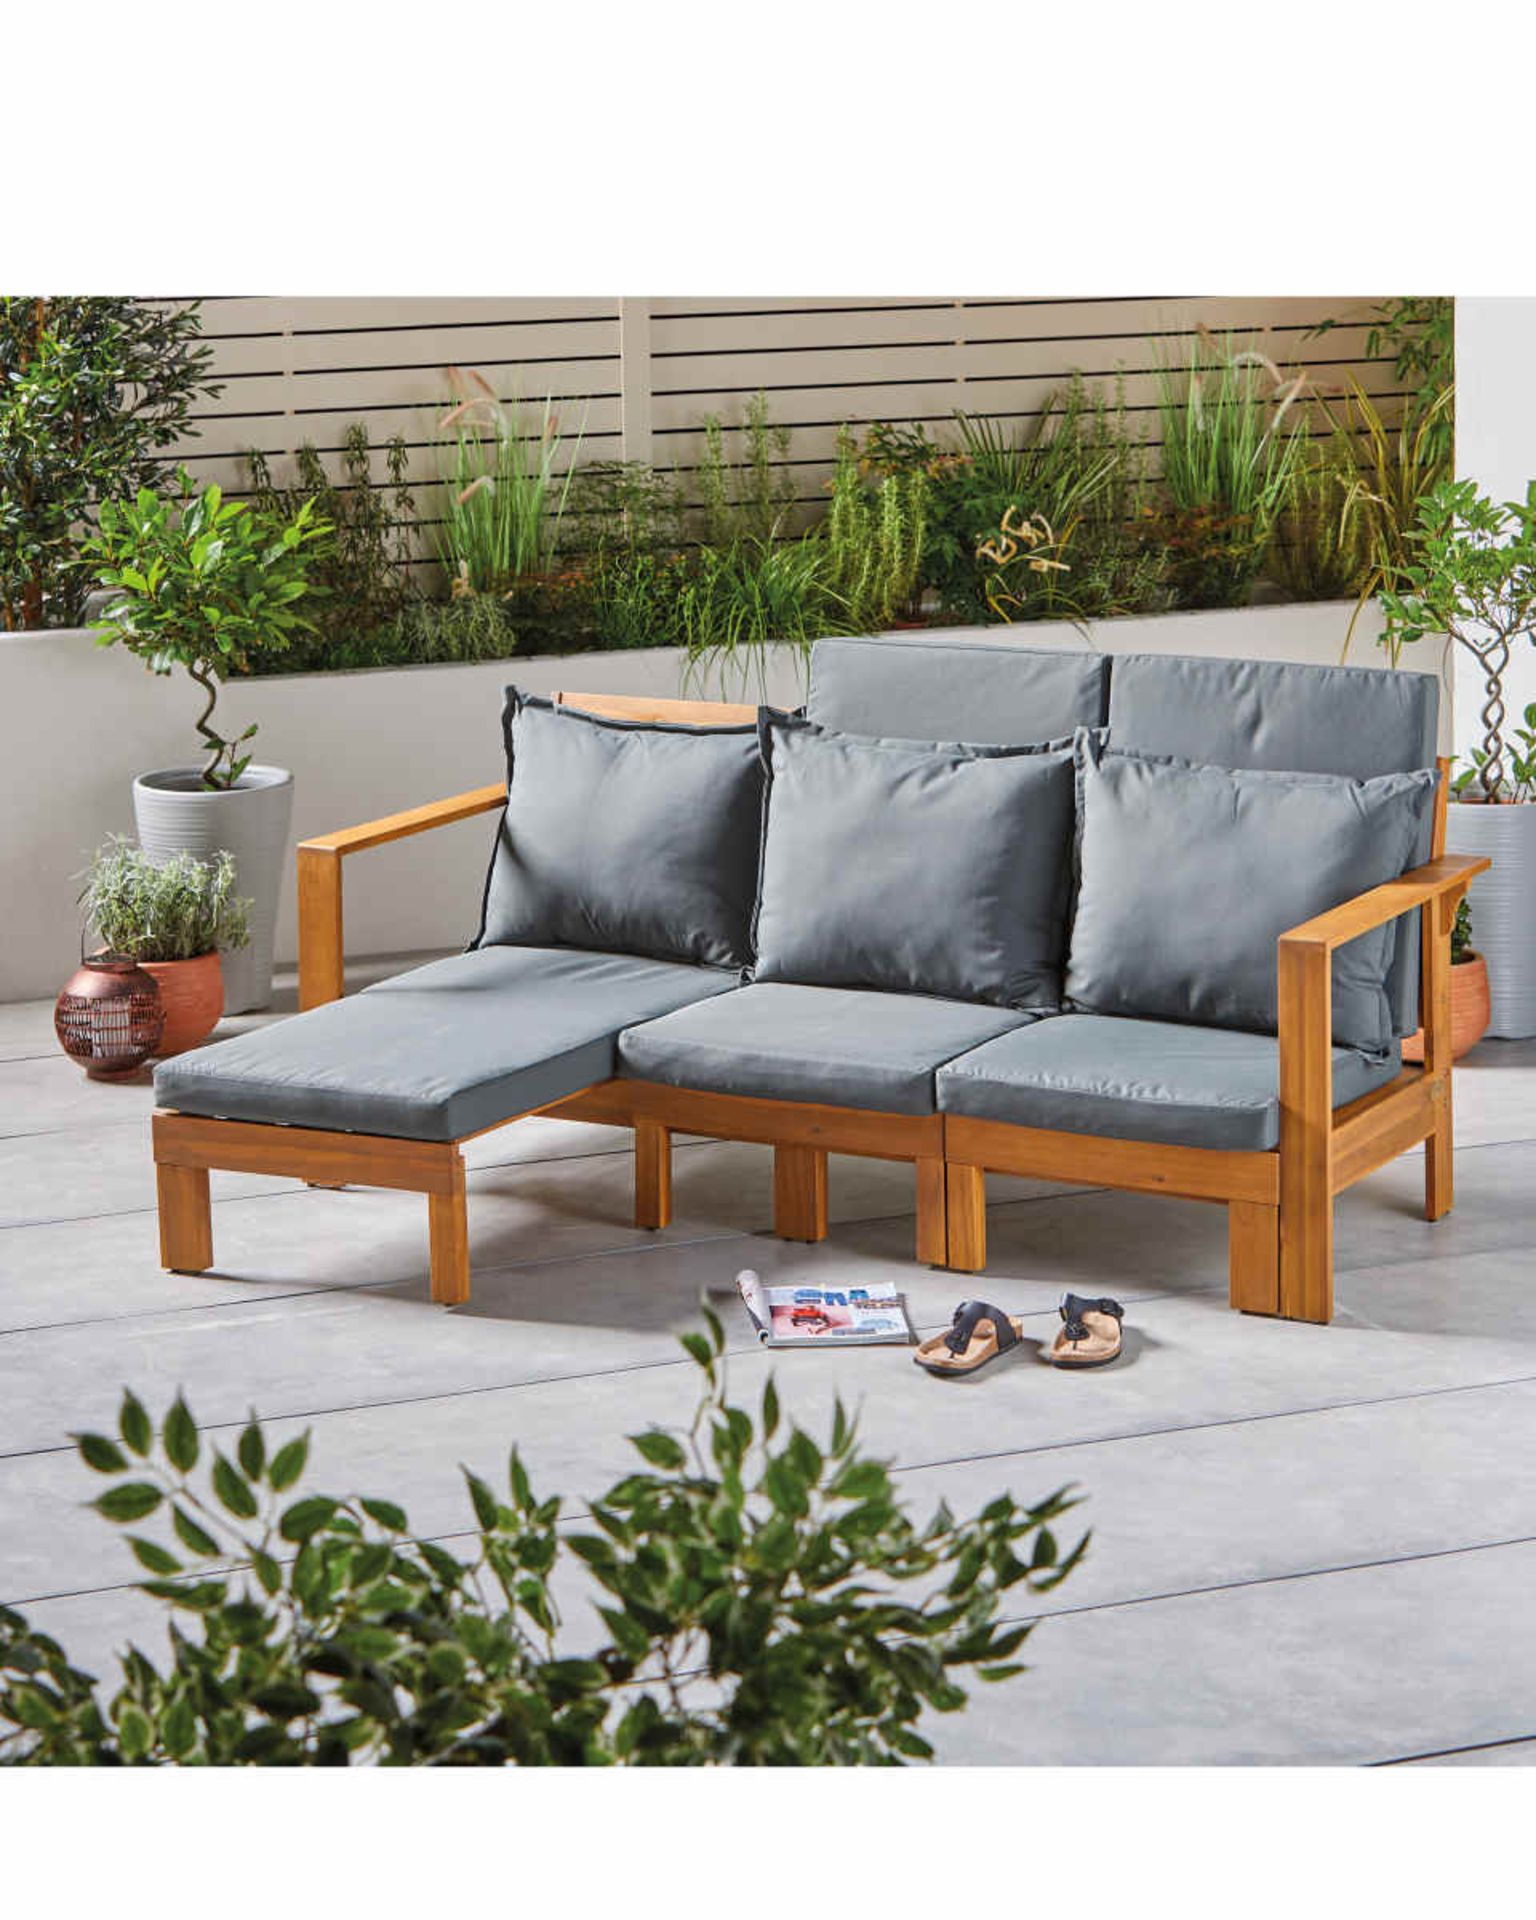 *LATE ADDED LOT* Luxury Wooden Garden Day Bed. Create a place of outdoor comfort with this stylish - Image 2 of 2